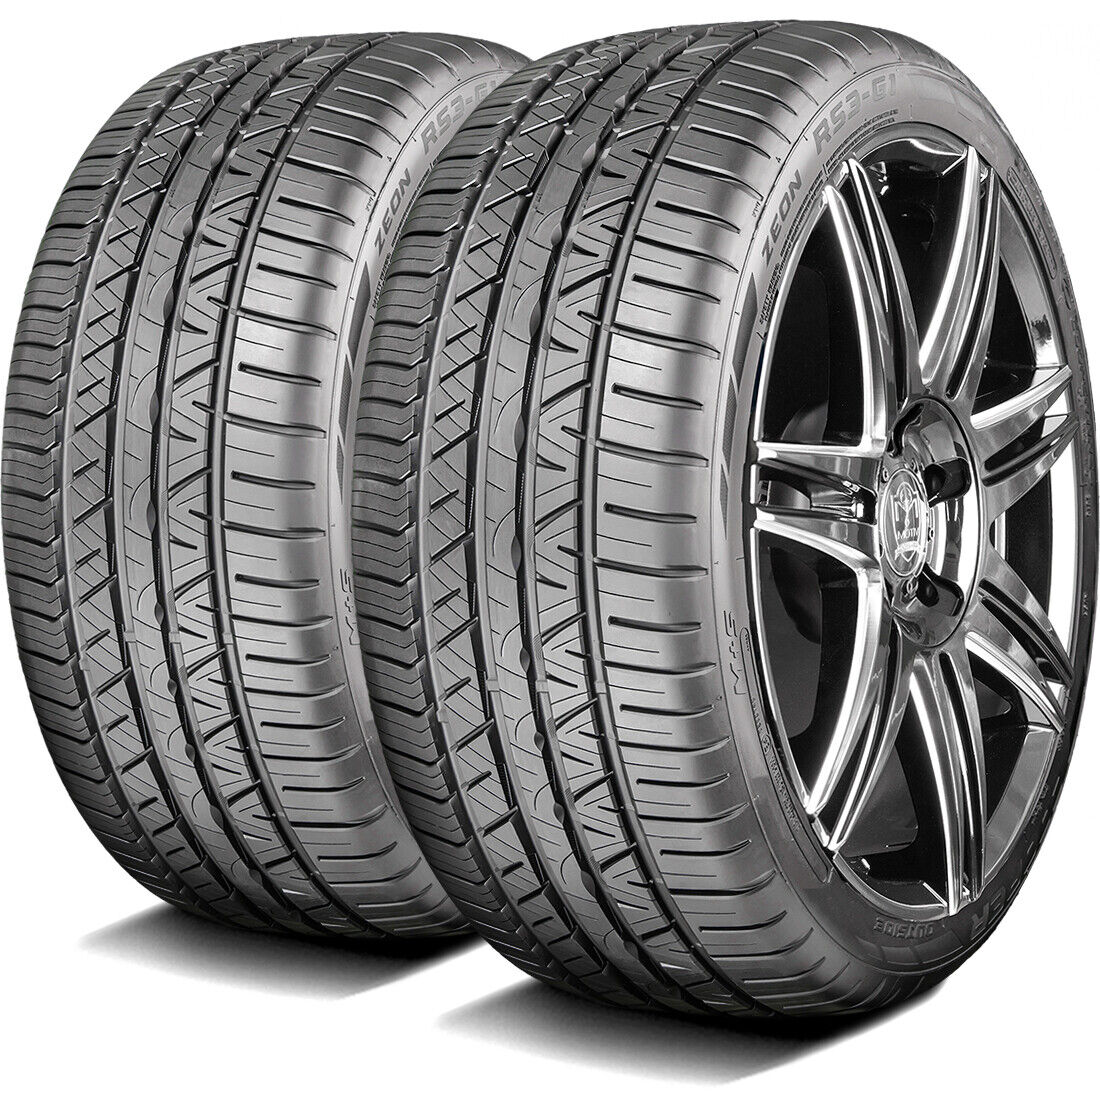 2 Tires Cooper Zeon RS3-G1 245/40R18 97W XL AS Performance A/S